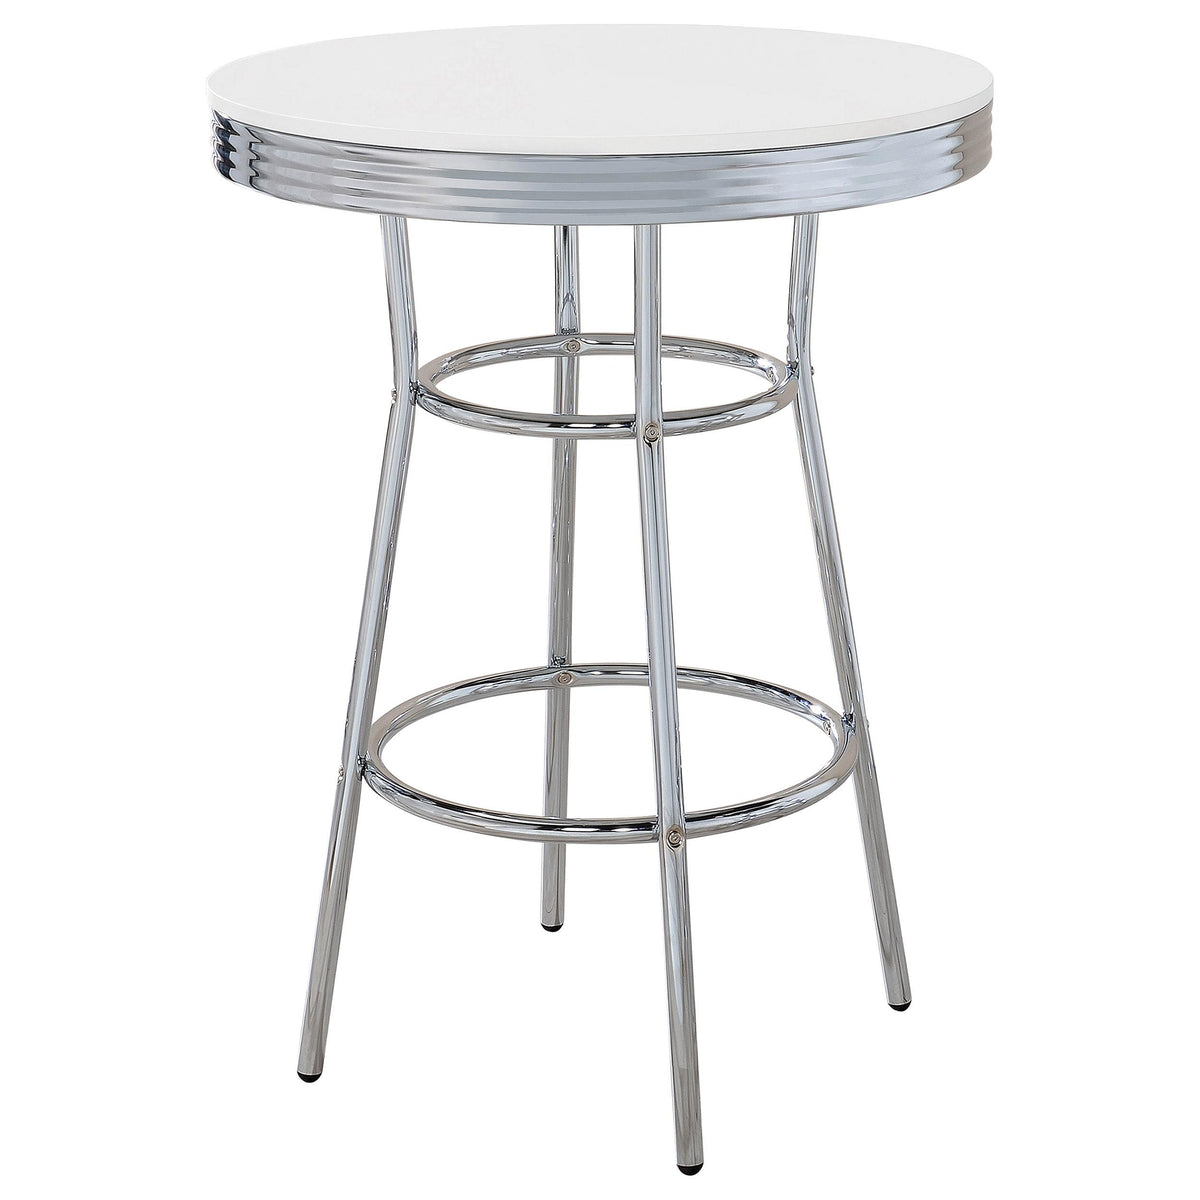 Theodore Round Bar Table Chrome and Glossy White  Las Vegas Furniture Stores